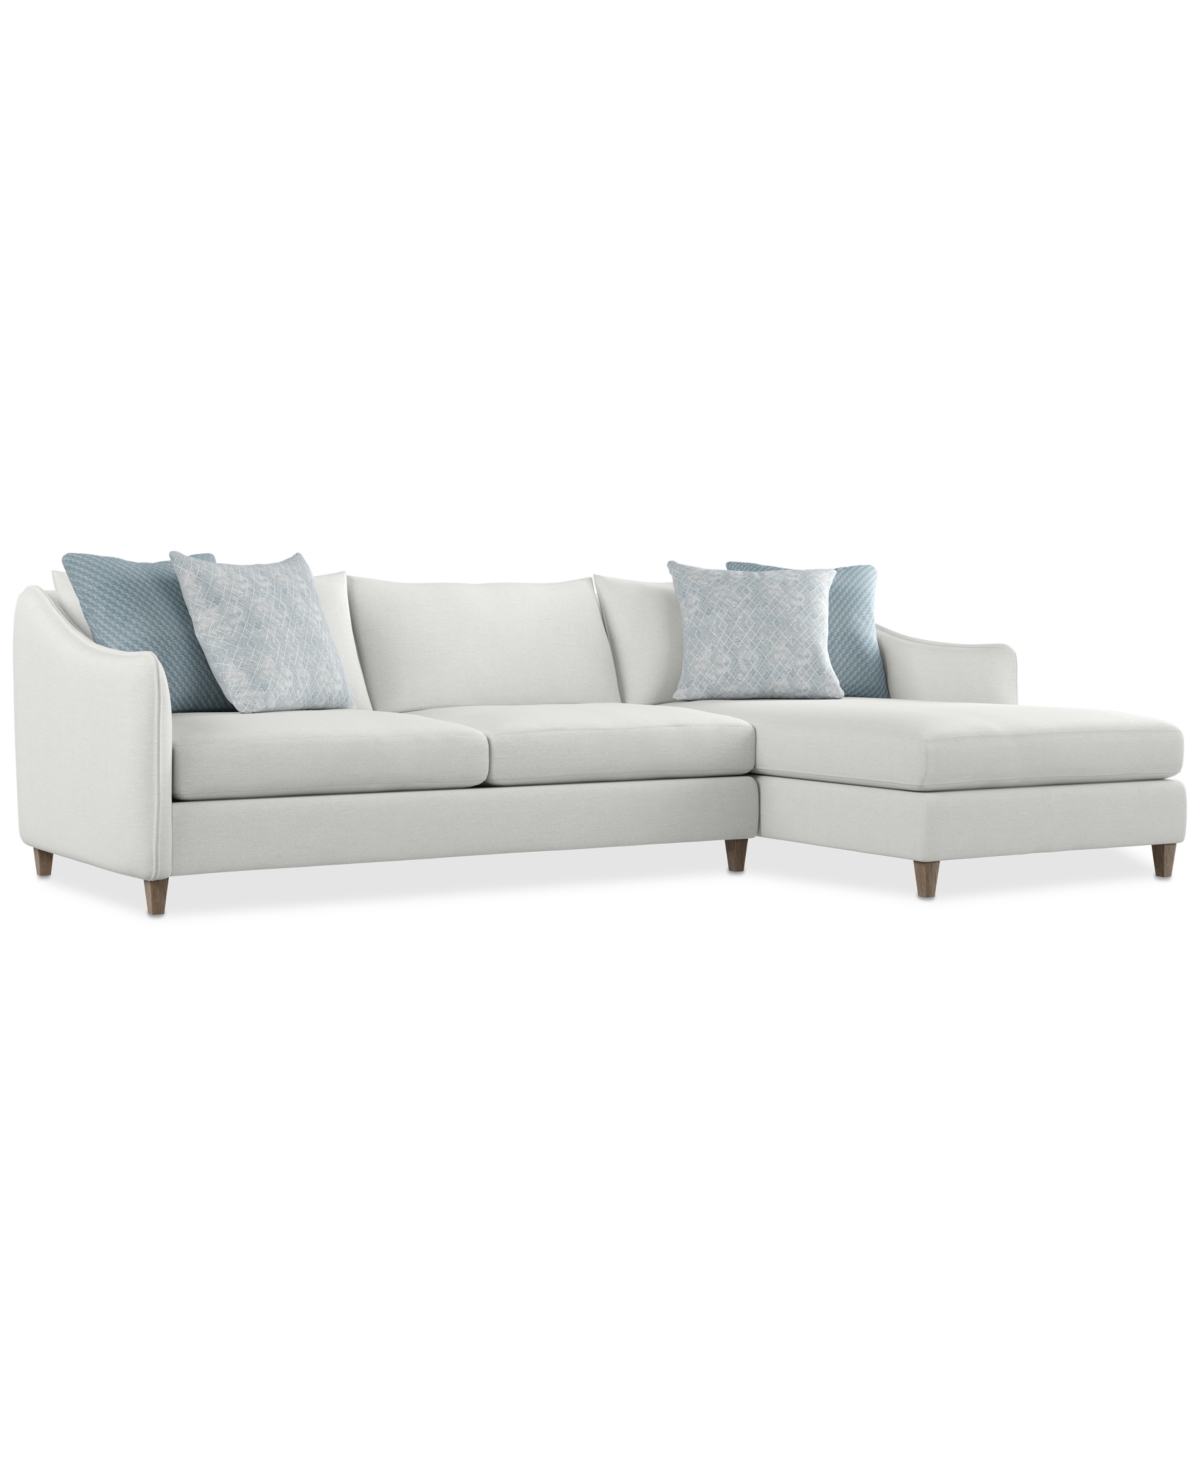 Highland Park 2-Pc. Fabric Joli Sectional with Chaise